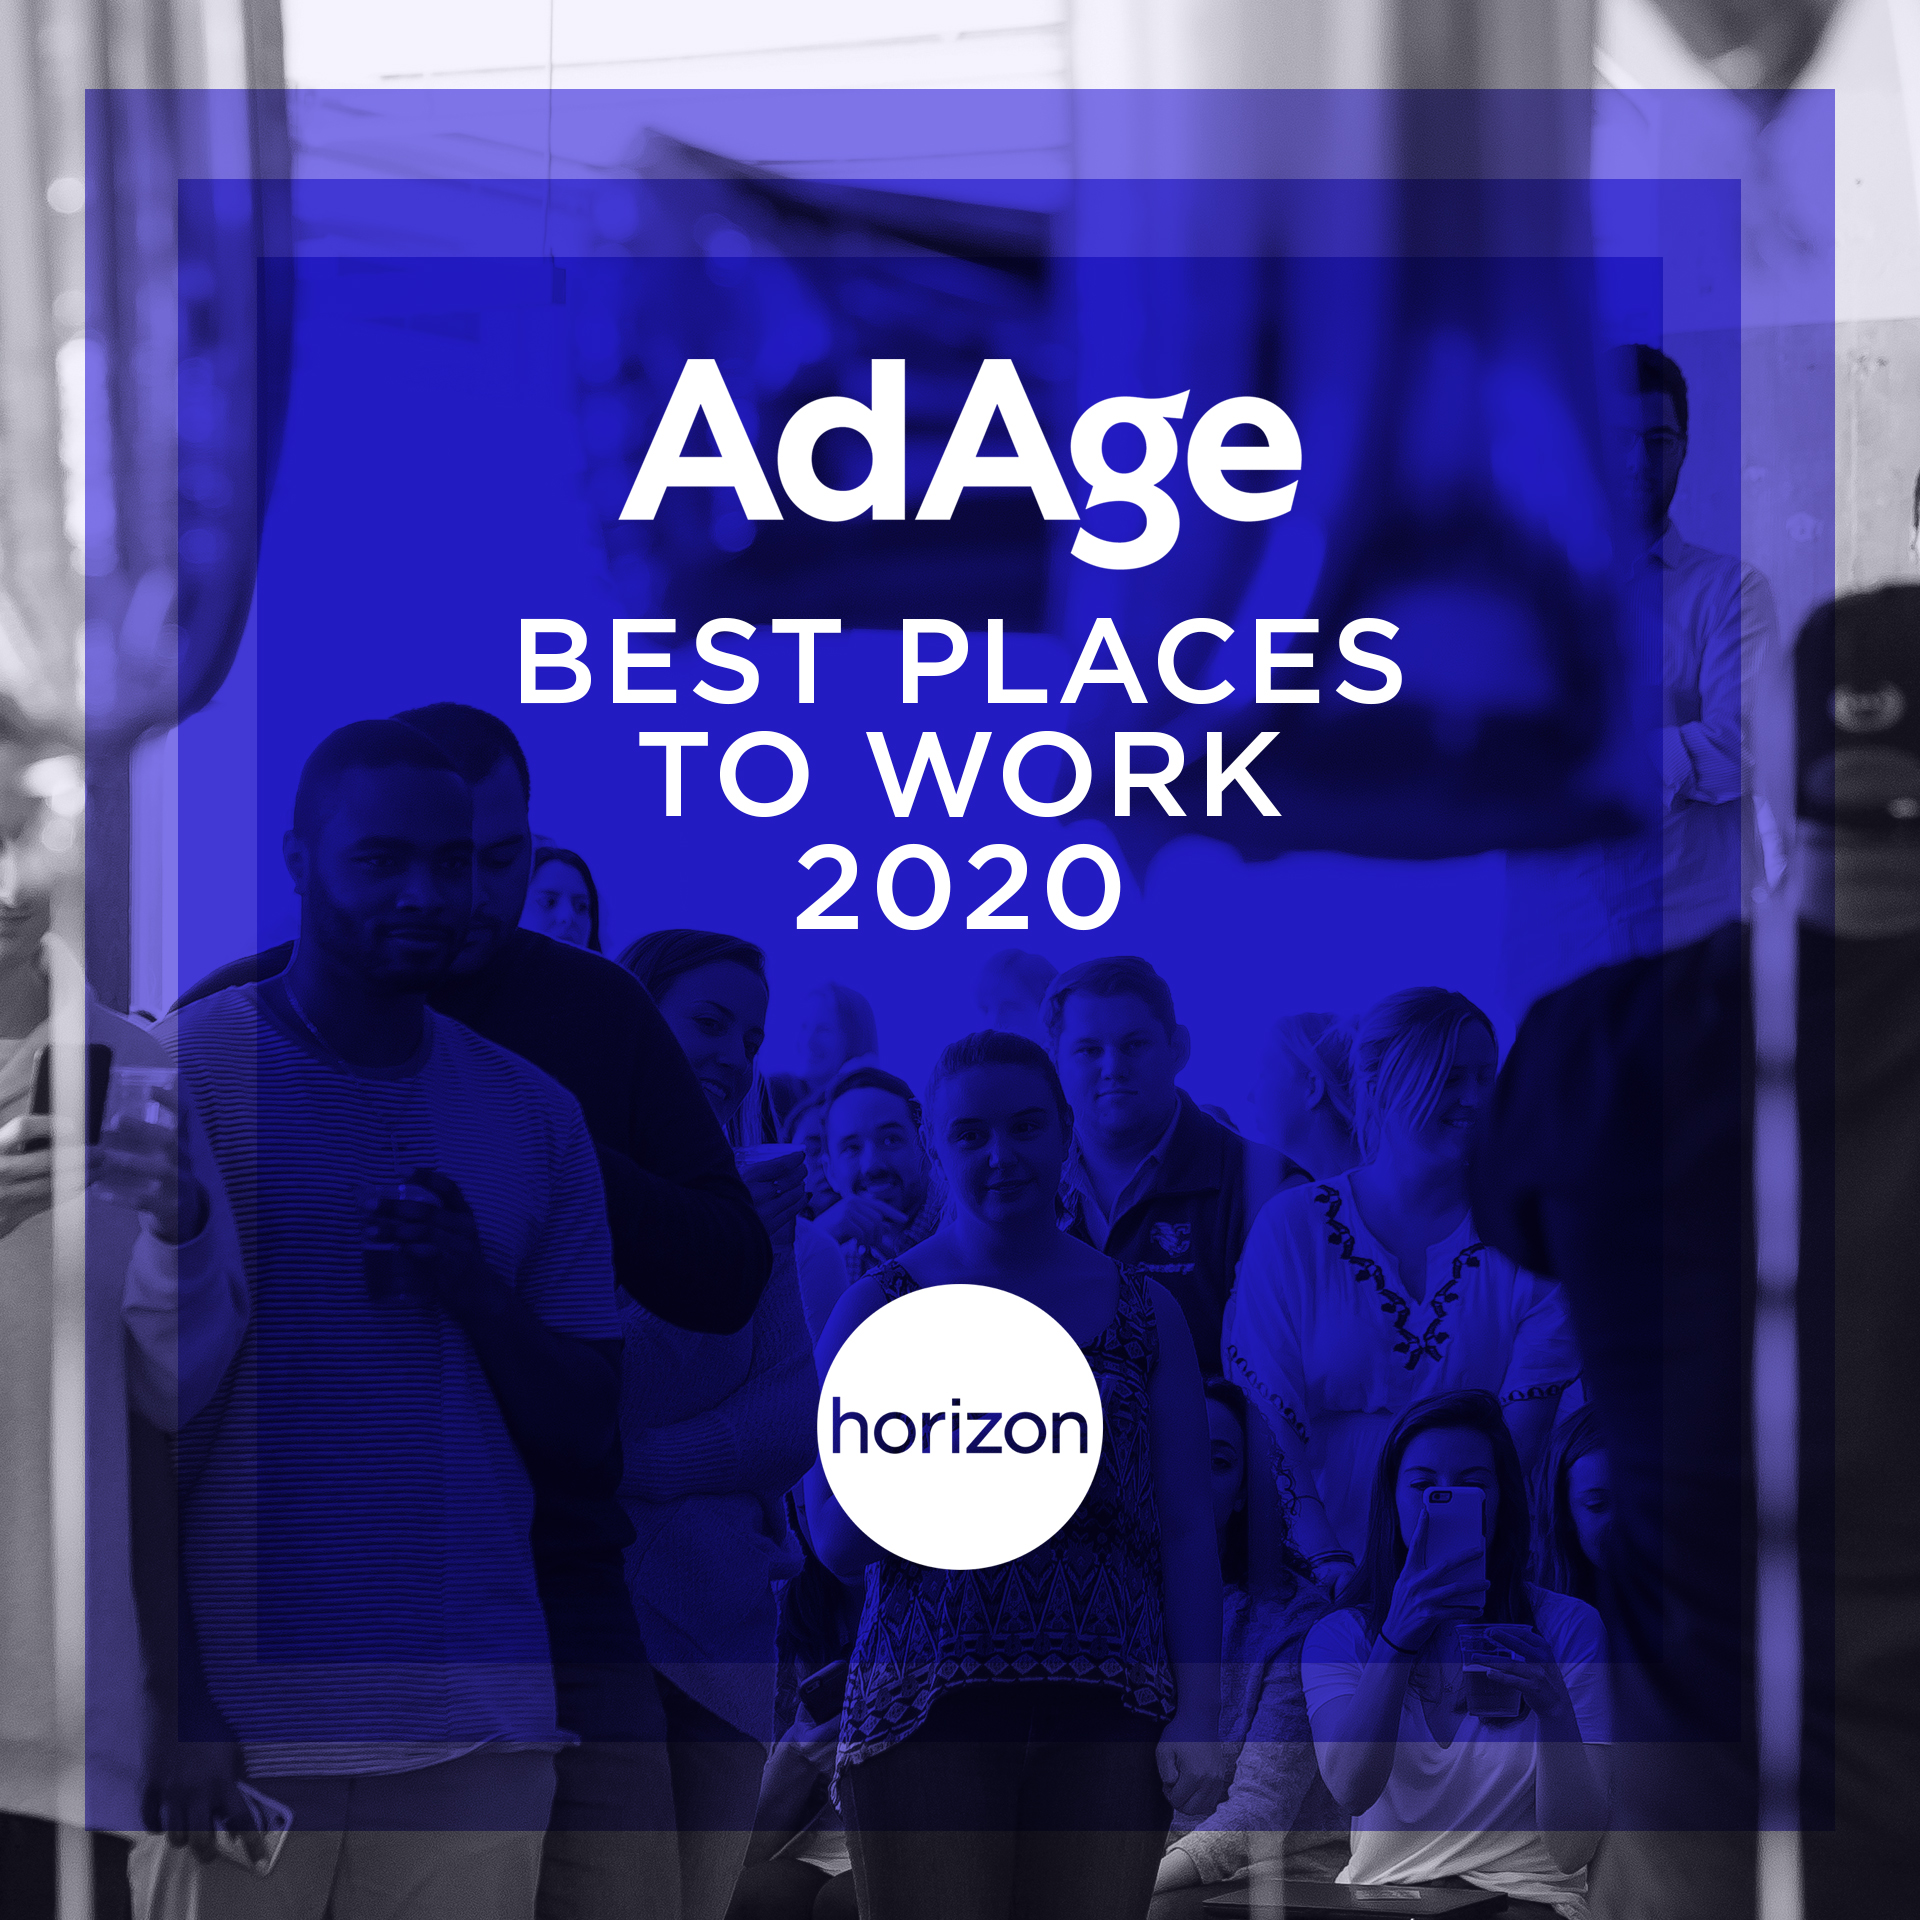 Horizon Media again named as an Adage Best Place to Work.